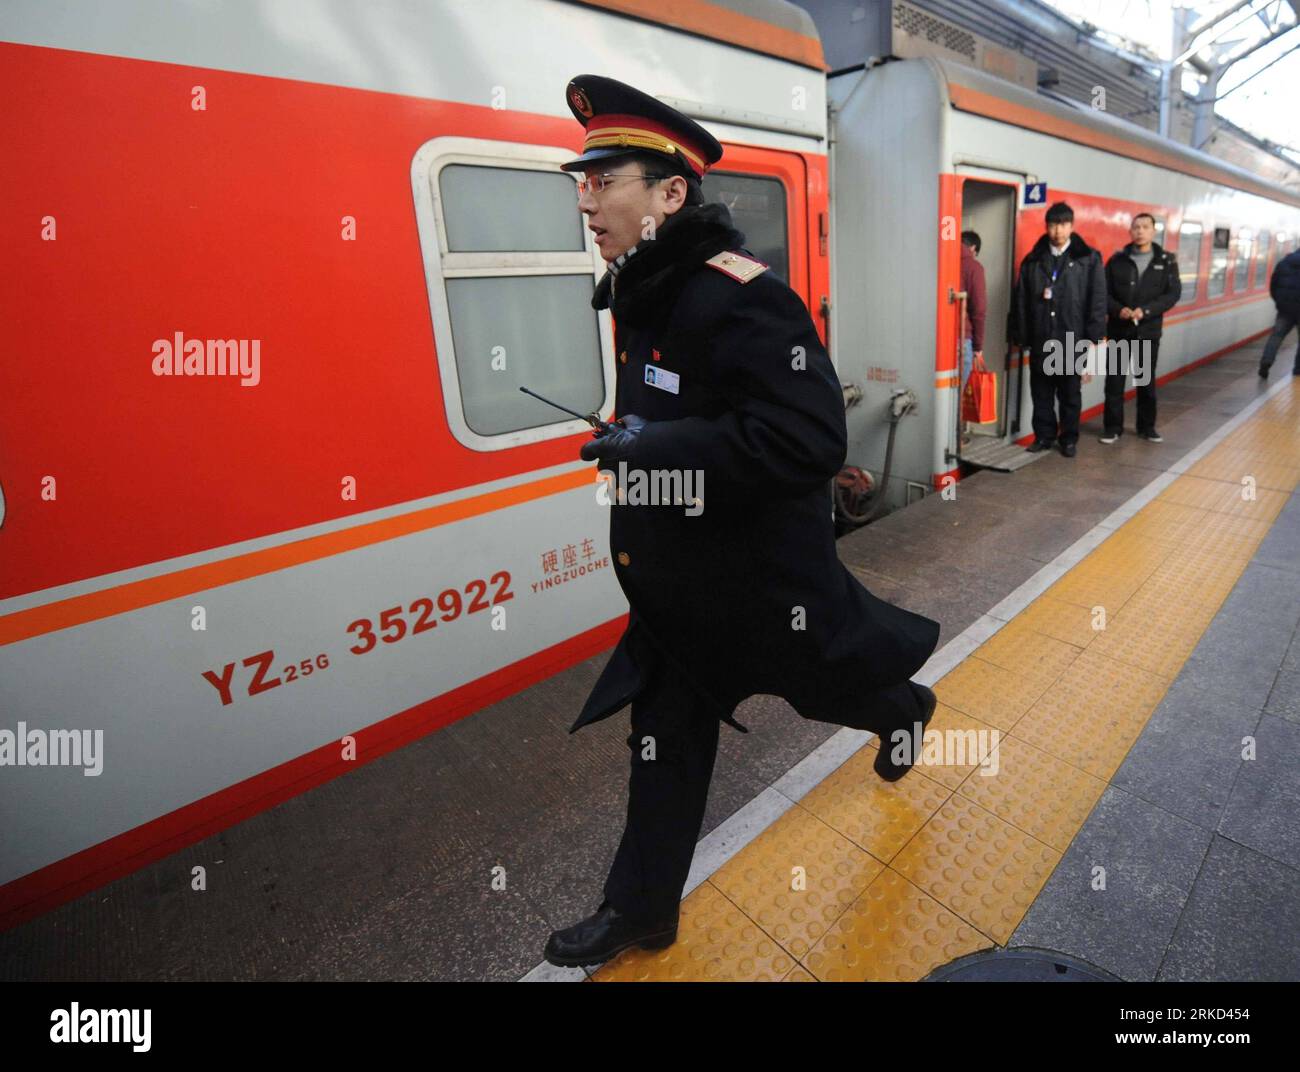 Bildnummer: 54858414  Datum: 27.01.2011  Copyright: imago/Xinhua (110127) -- BEIJING, Jan. 27, 2011 (Xinhua) -- Wang Le, a staff member of Beijing West Railway Station, runs on a deck at the station in Beijing, capital of China, Jan. 25, 2011. Since China s 40-day period of Spring festival travel rush began on Jan. 19, all of the station s staff members have extended their labor time to more than 10 hours a day to ensure trains setting off and arriving on time with their passengers. The nationwide railway system transported 35, 886, 000 passengers from Jan. 19 to Jan. 26, according to railway Stock Photo